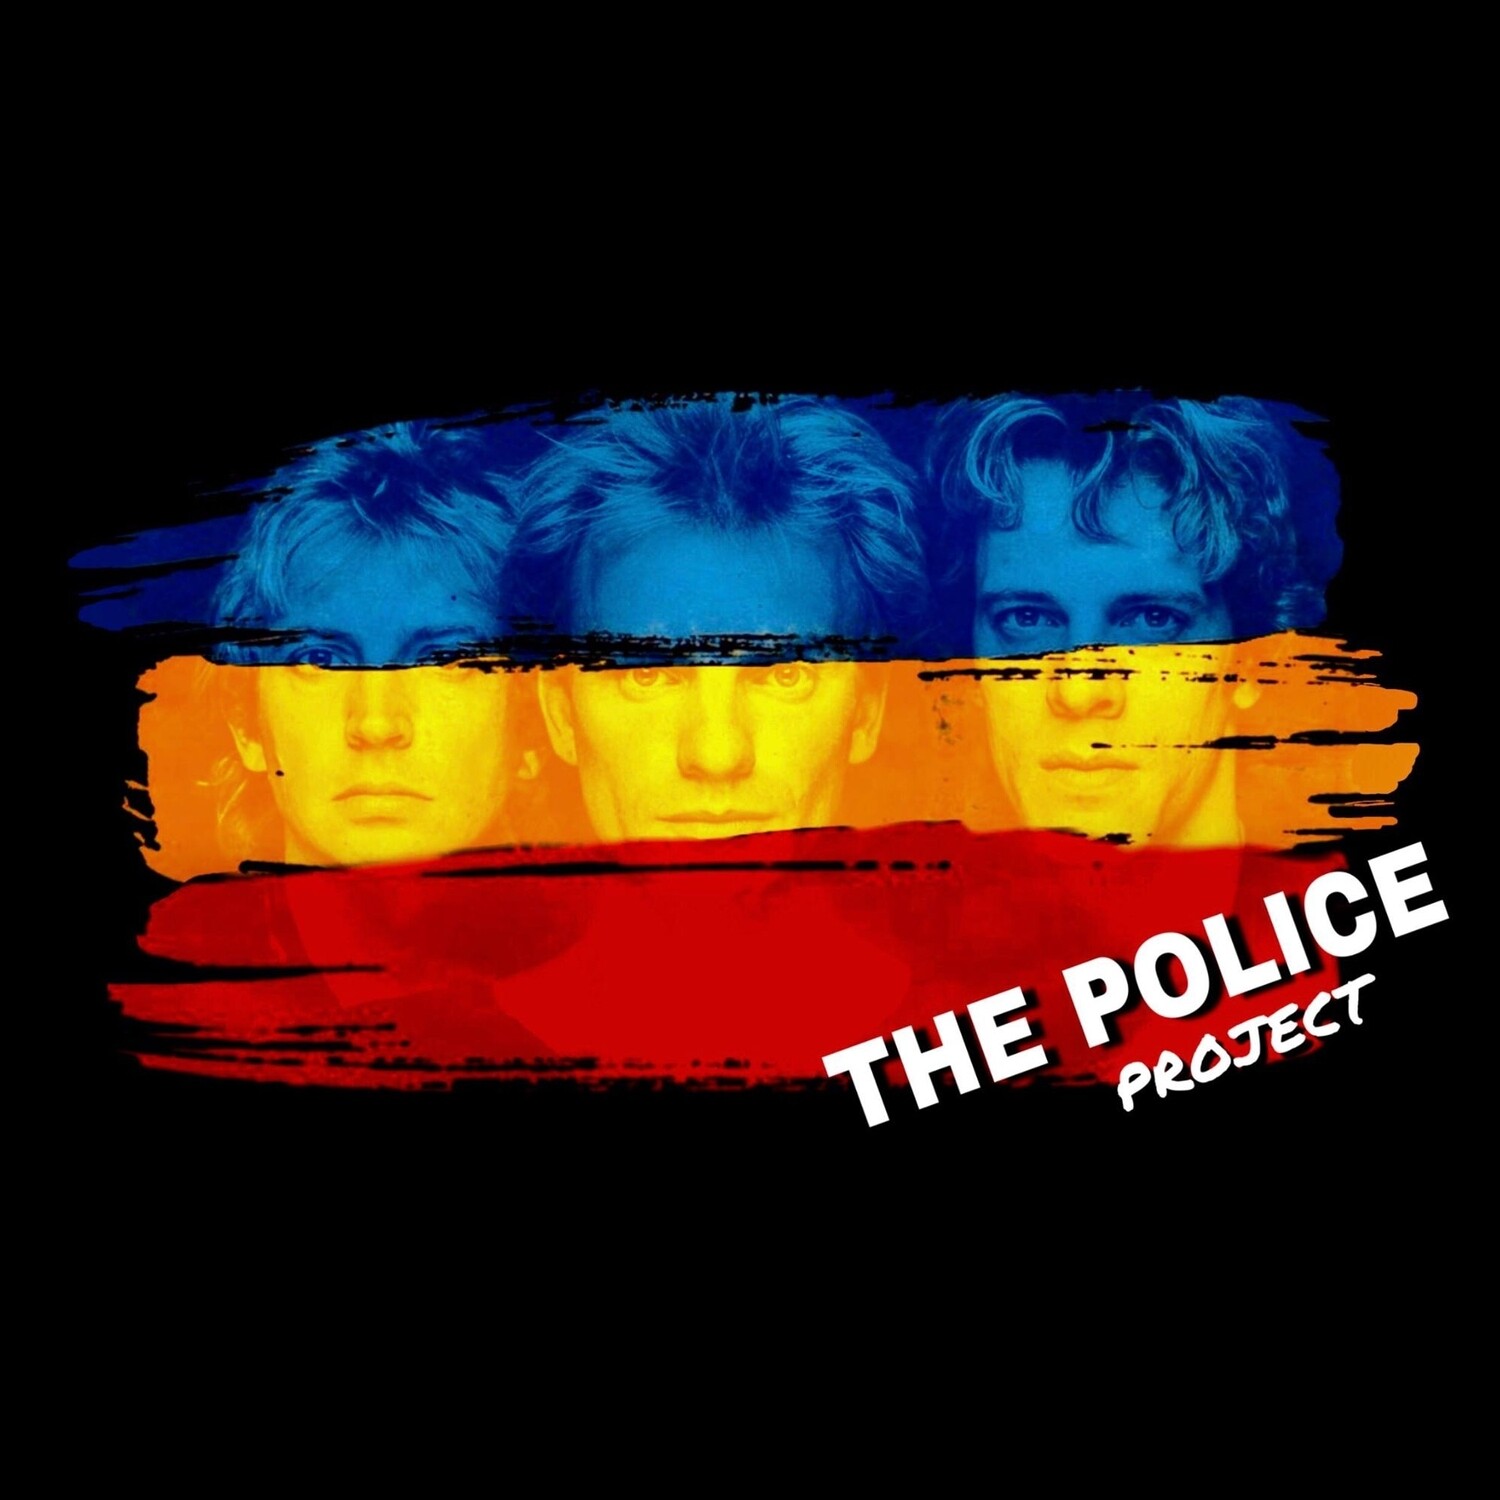 THE POLICE PROJECT  TRIBUTE POLICE